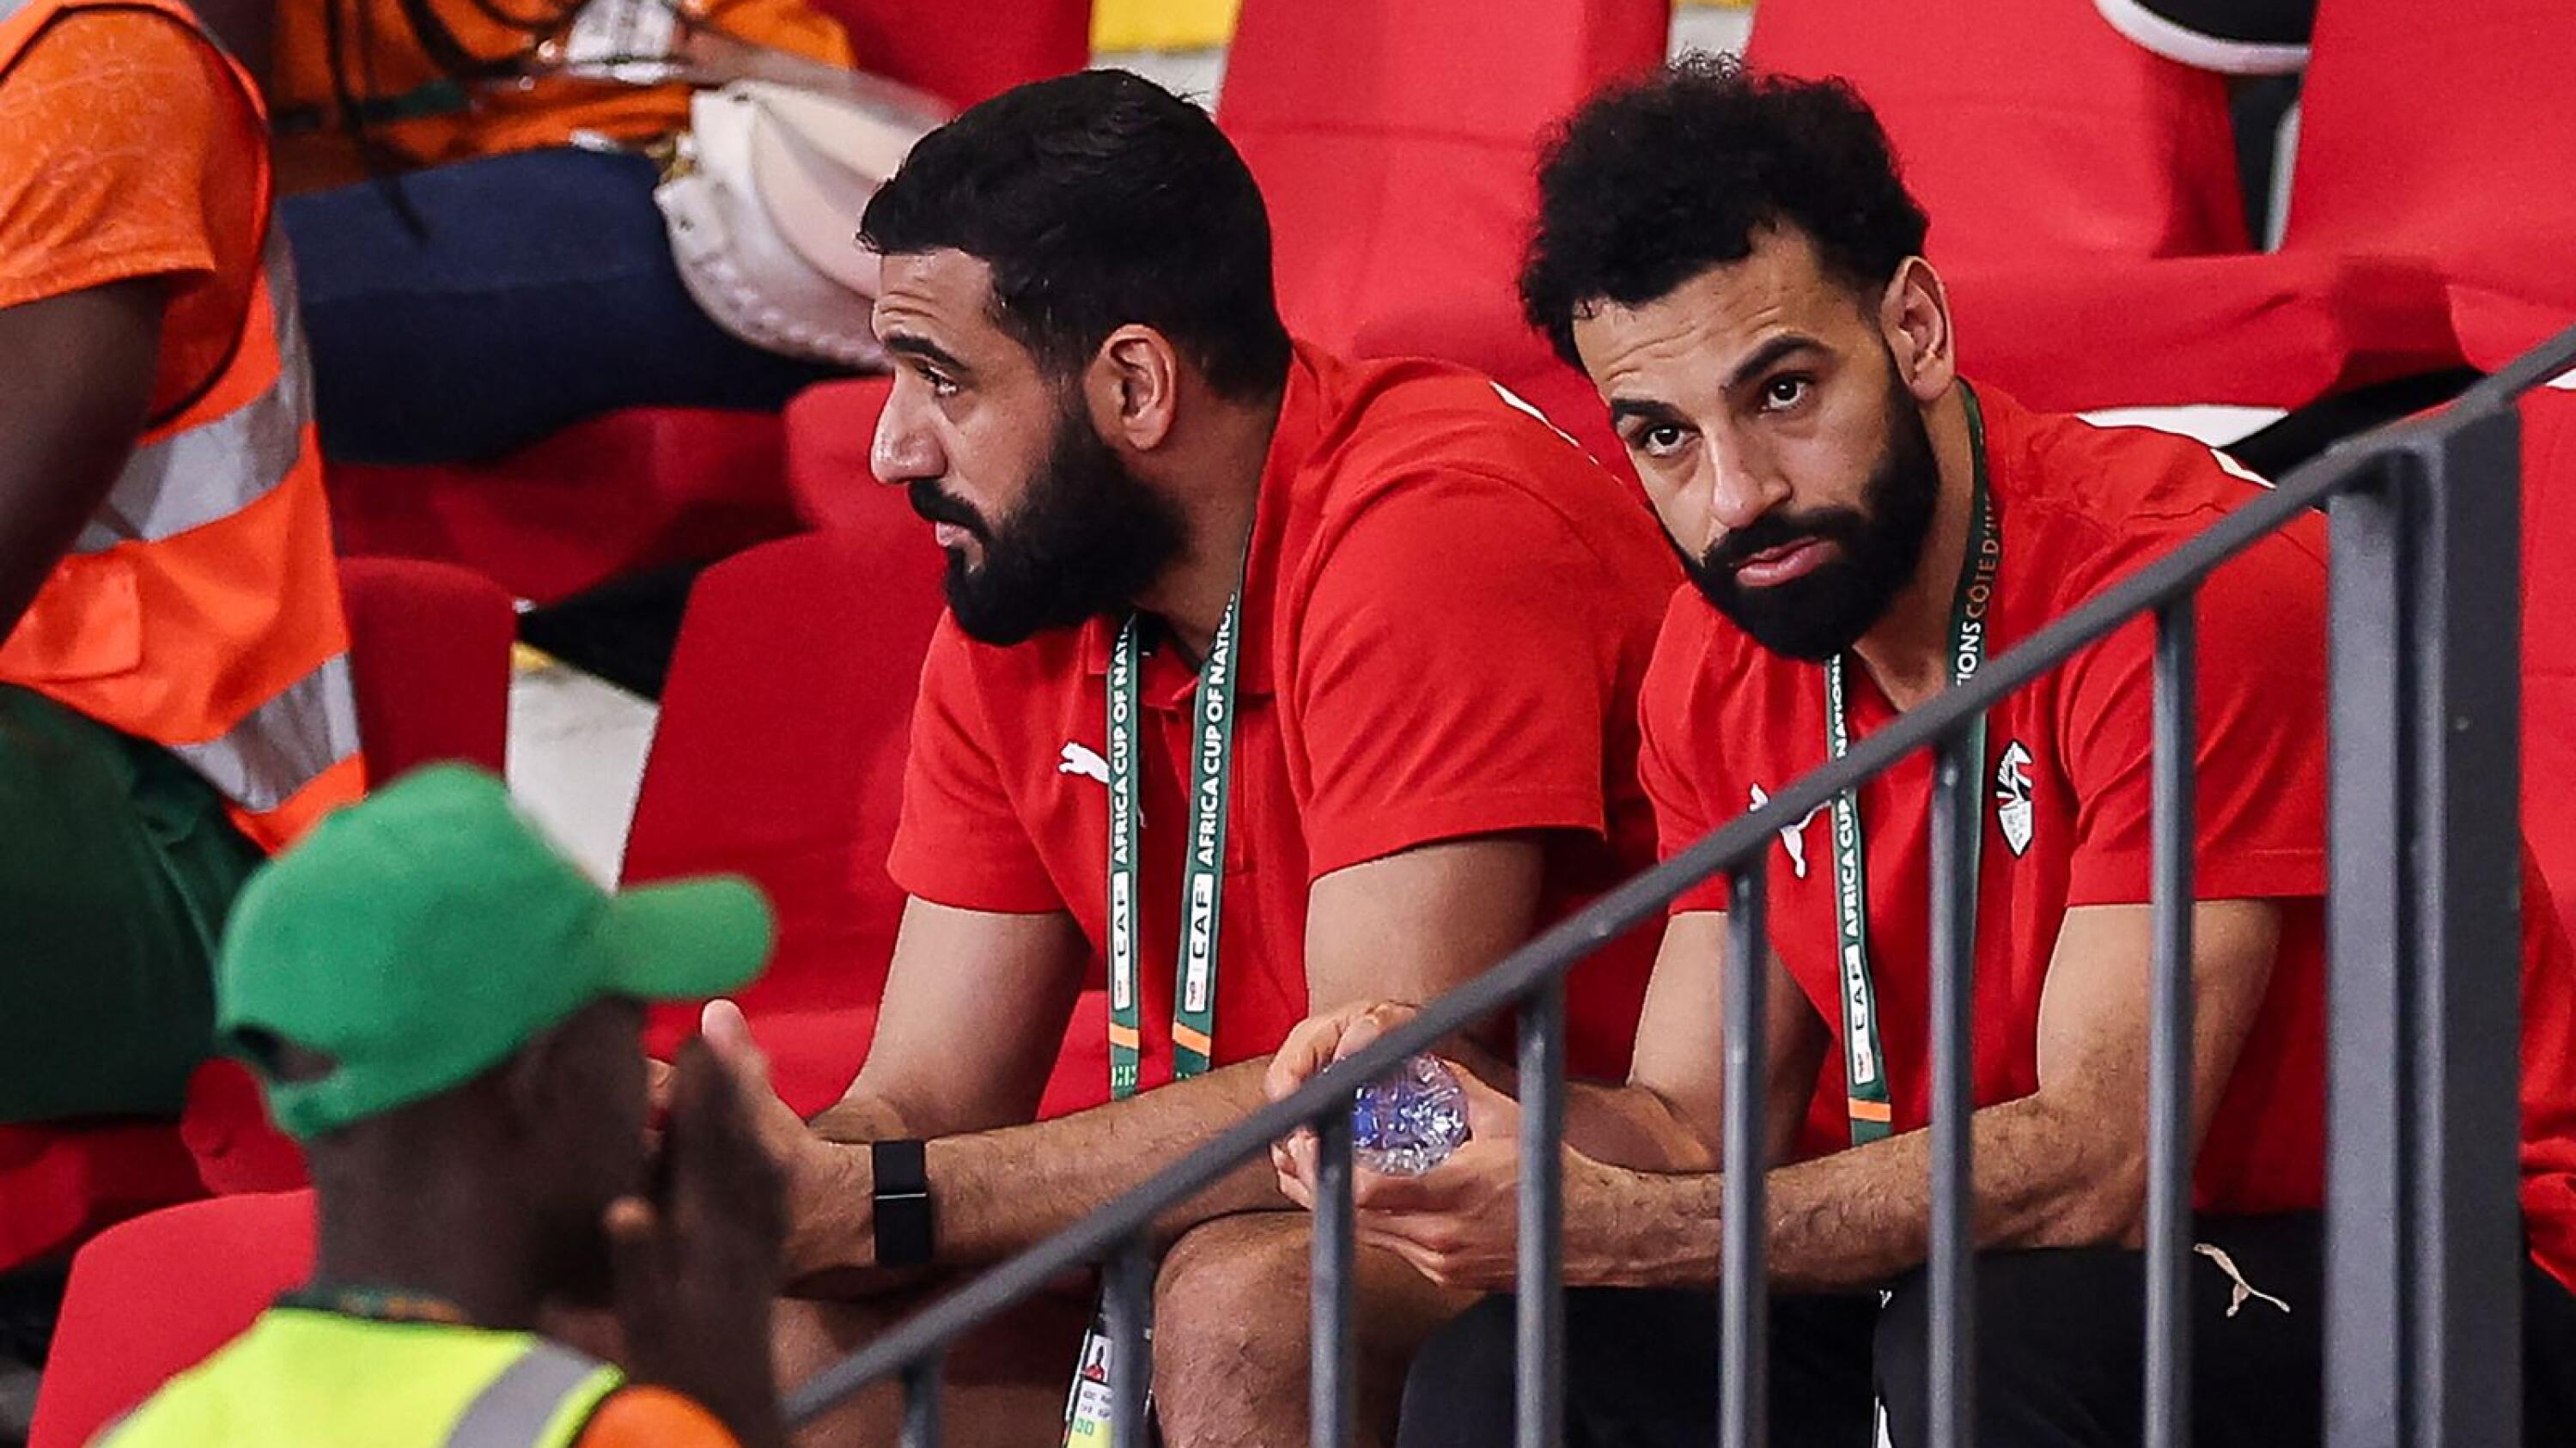 Egypt's Mohamed Salah looks on as he attends the Africa Cup of Nations group A football match against Guinea-Bissau